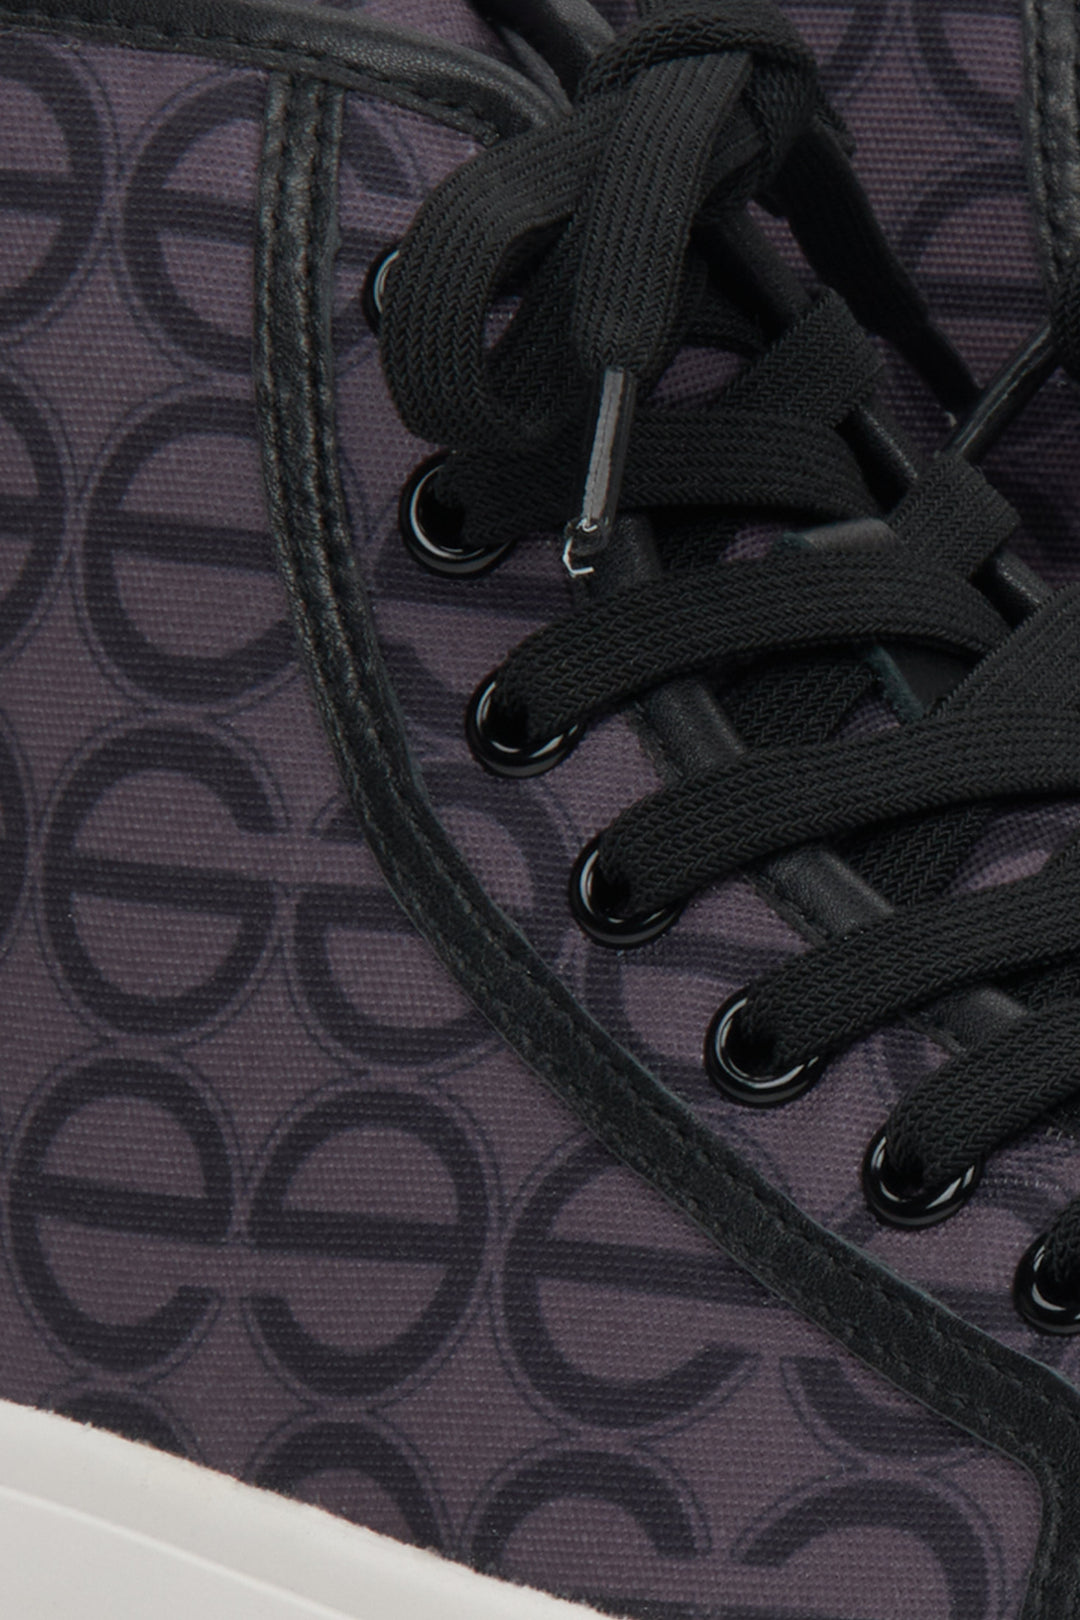 Women's high top sneakers in purple and black - close-up on details.